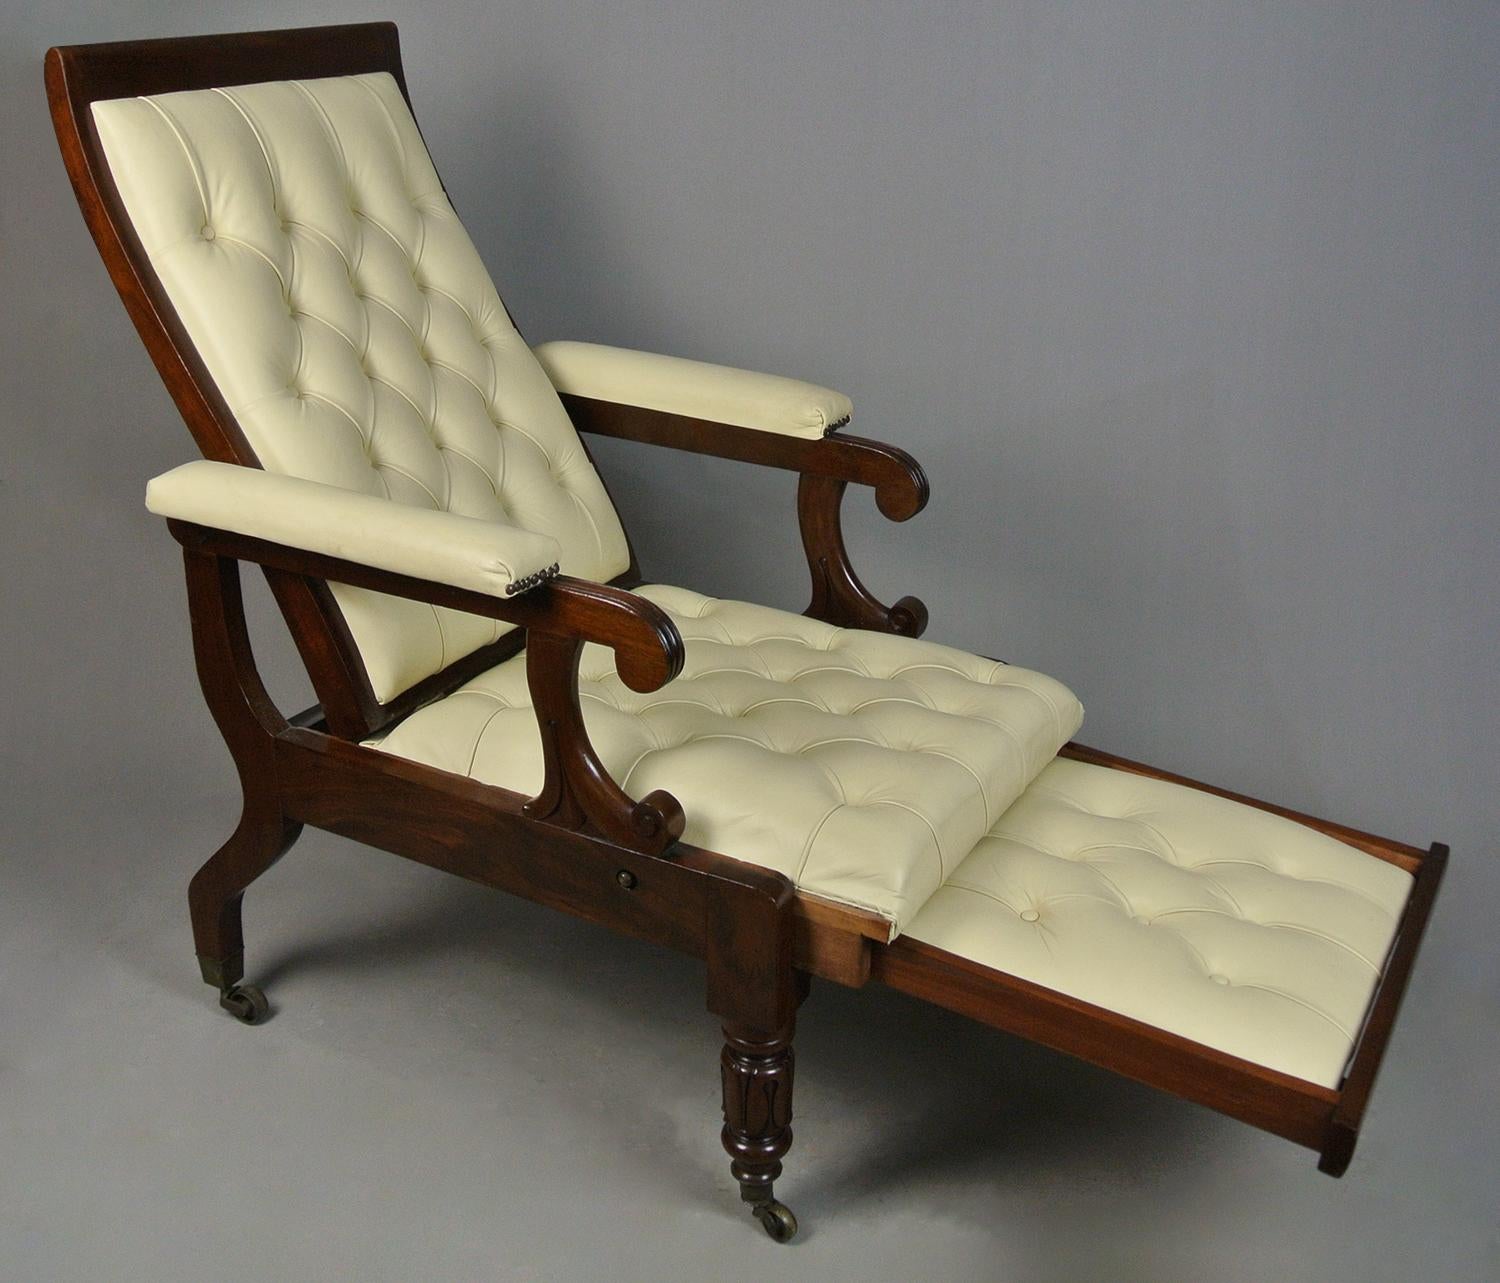 19th Century Regency Solid Mahogany ‘Daws Patent’ Reclining Chair c. 1830 For Sale